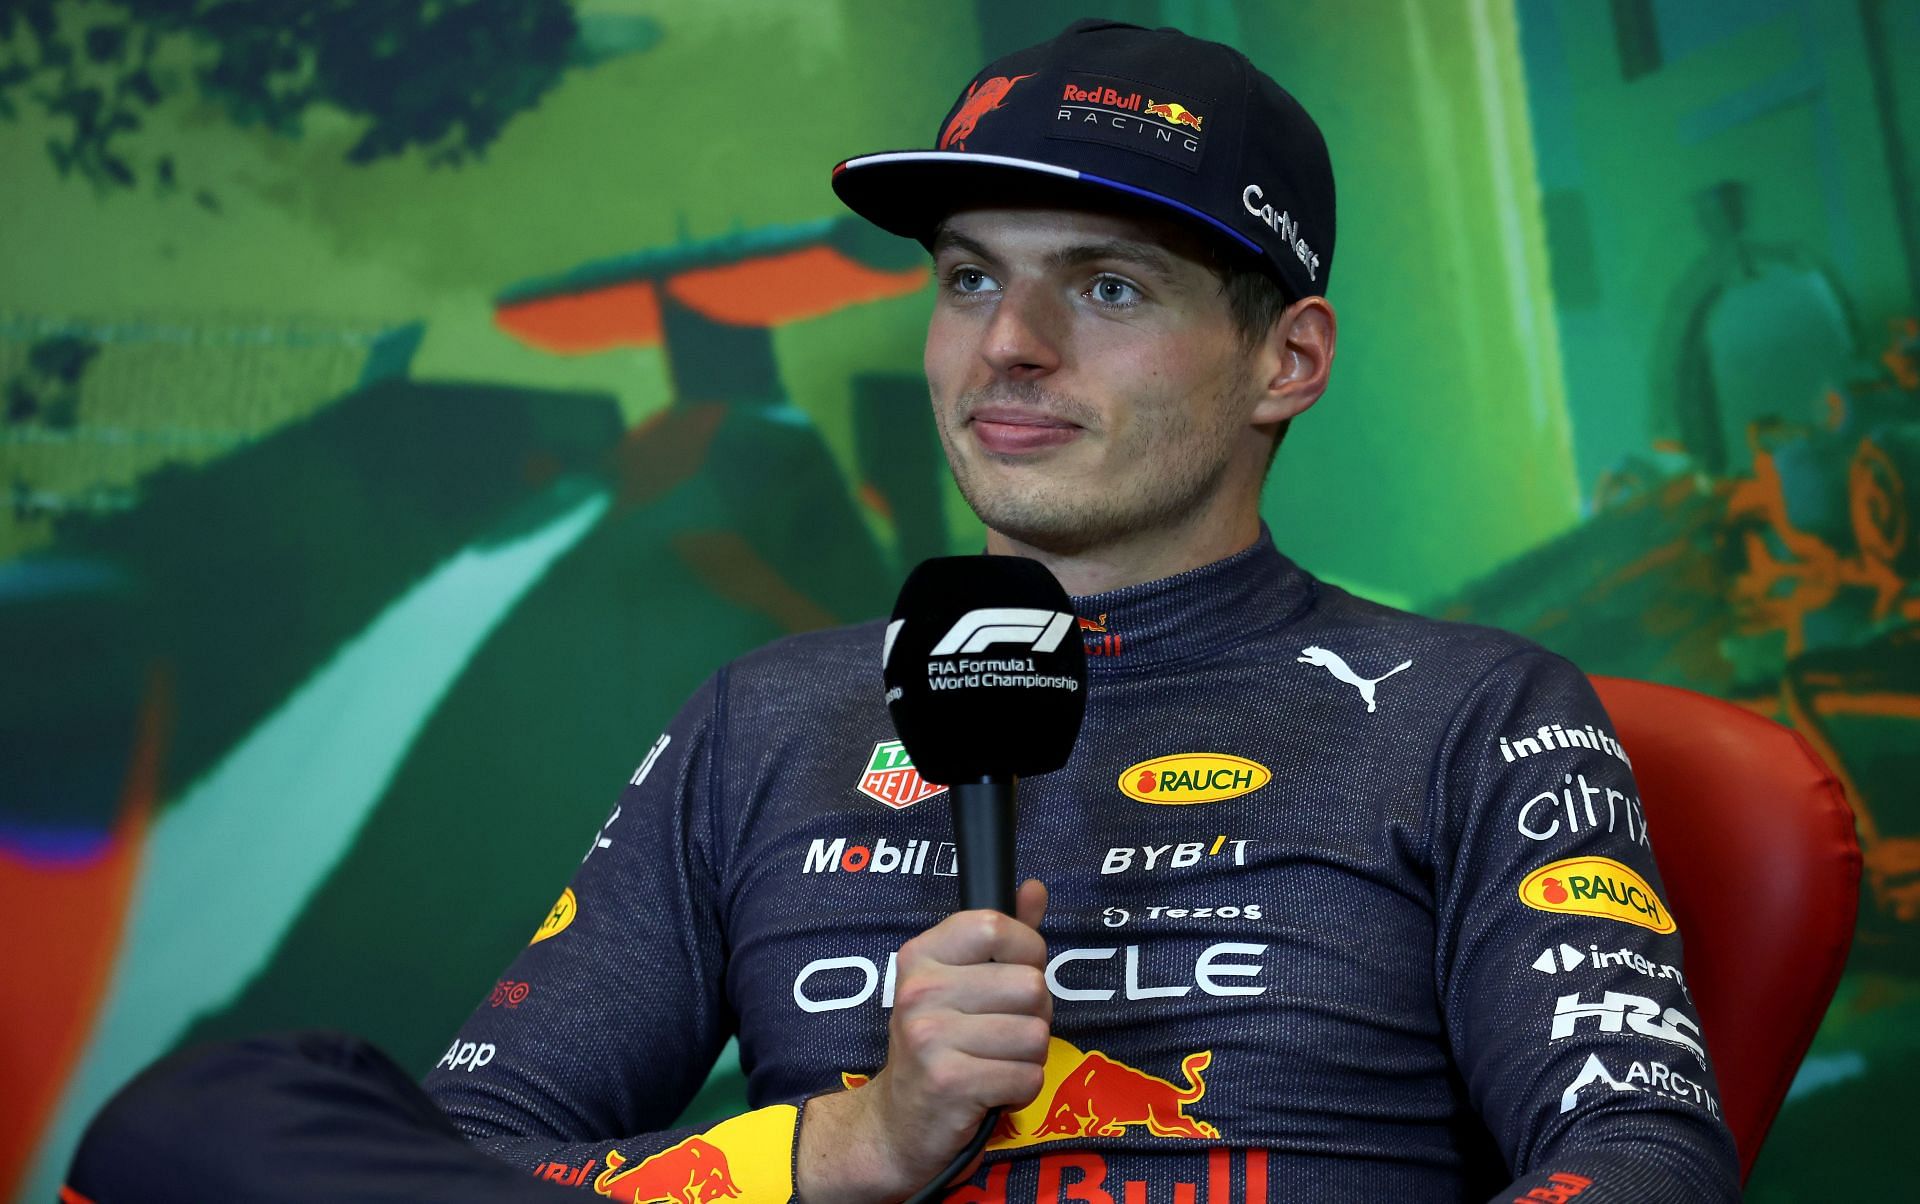 Red Bull driver Max Verstappen speaks to the media after winning the 2022 F 1 Azerbaijan GP (Photo by Bryn Lennon/Getty Images)